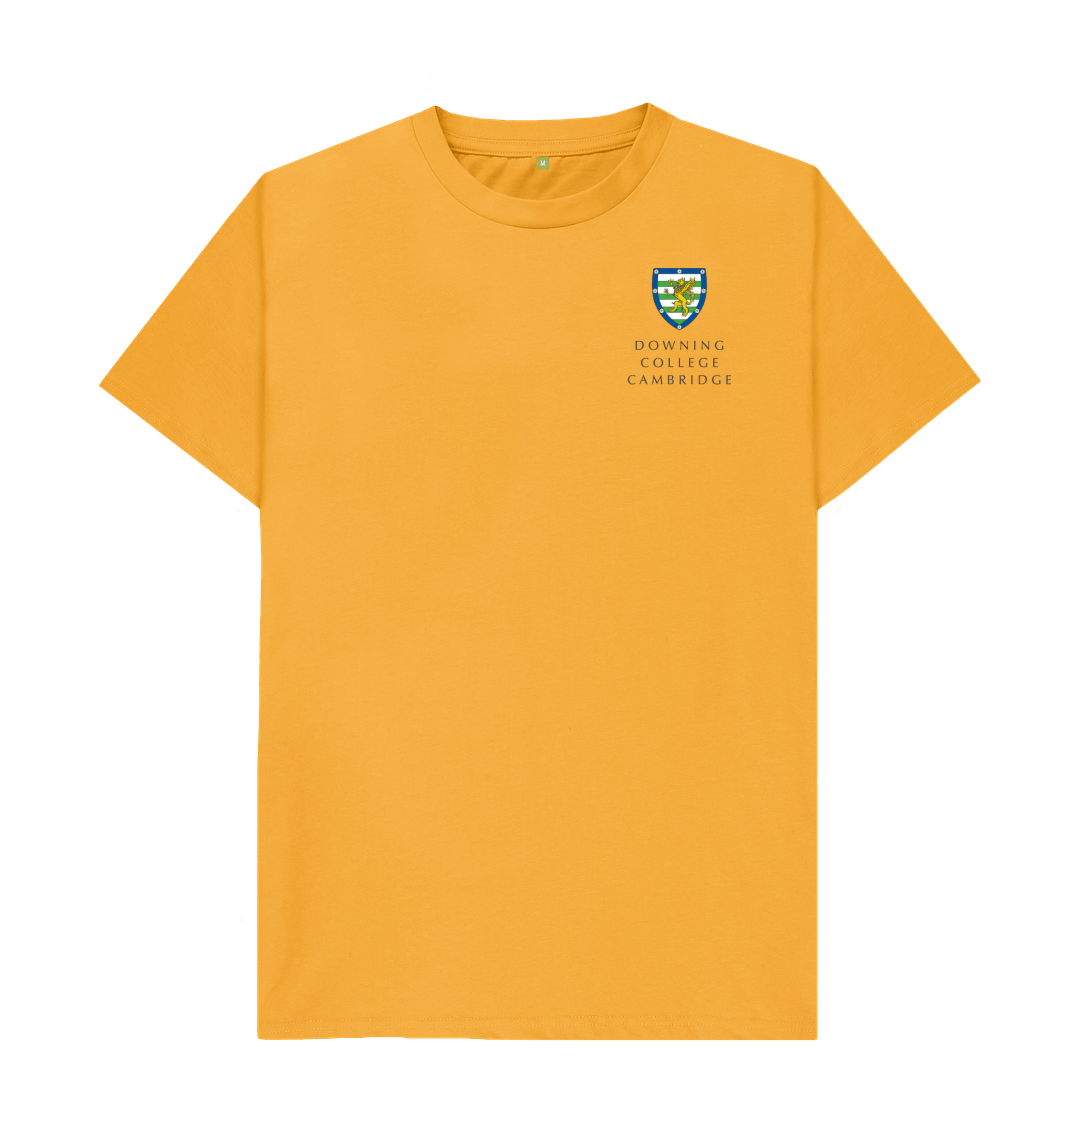 Downing College Crew neck tee - light colours